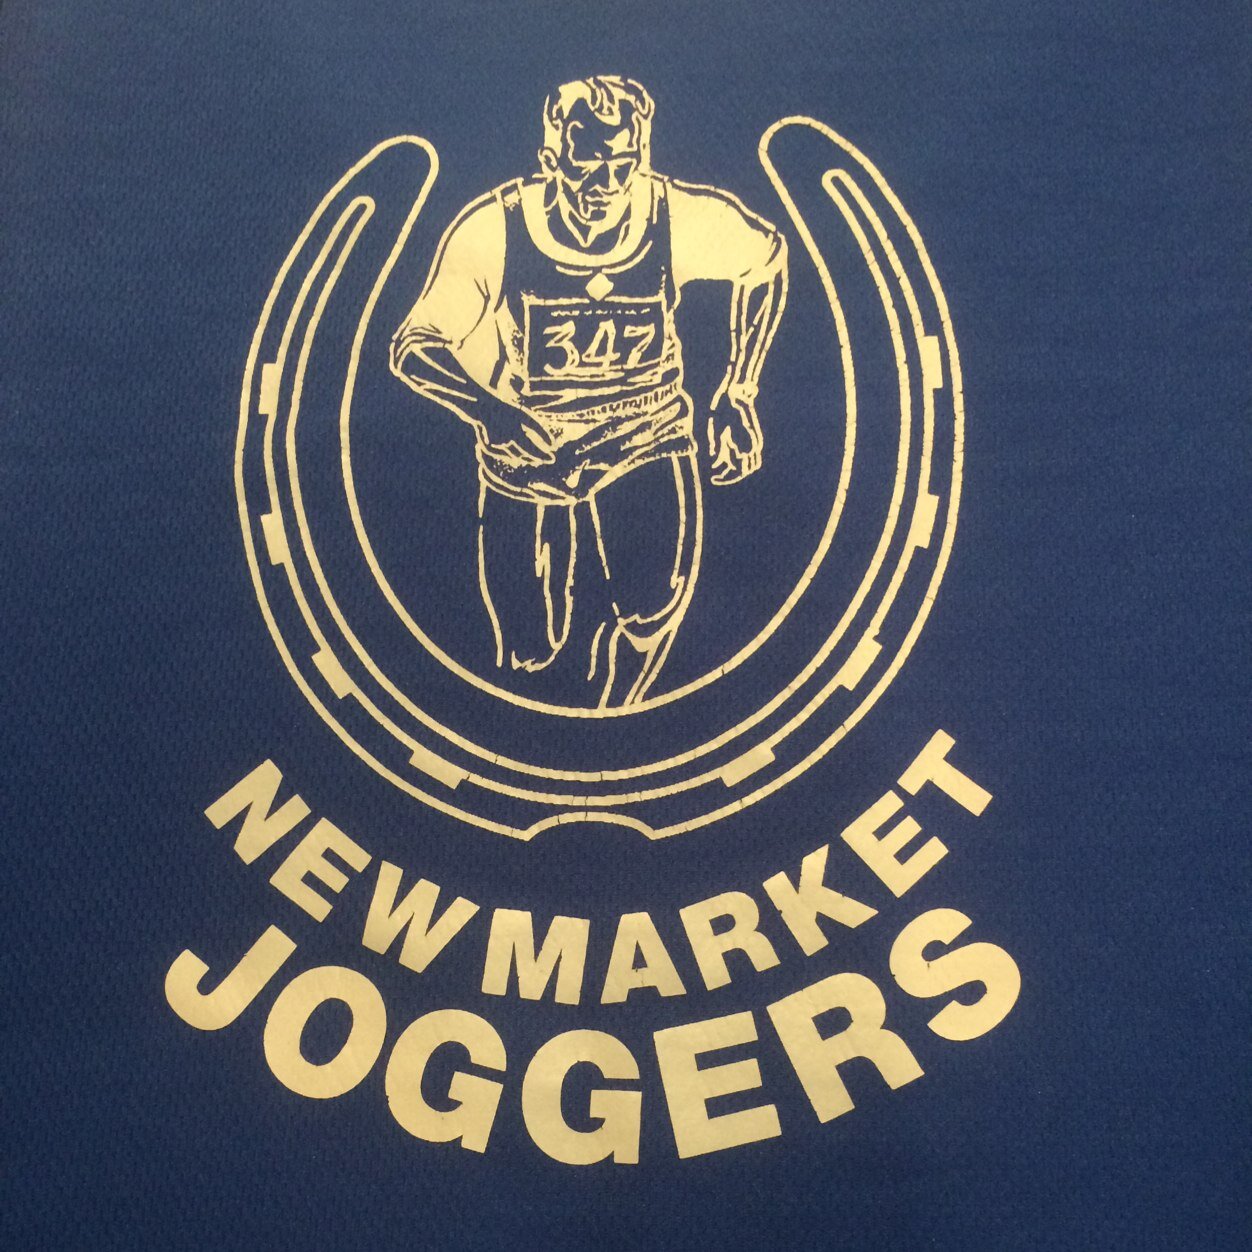 Newmarket Joggers is an established friendly club meeting twice weekly for runners of all levels and abilities.